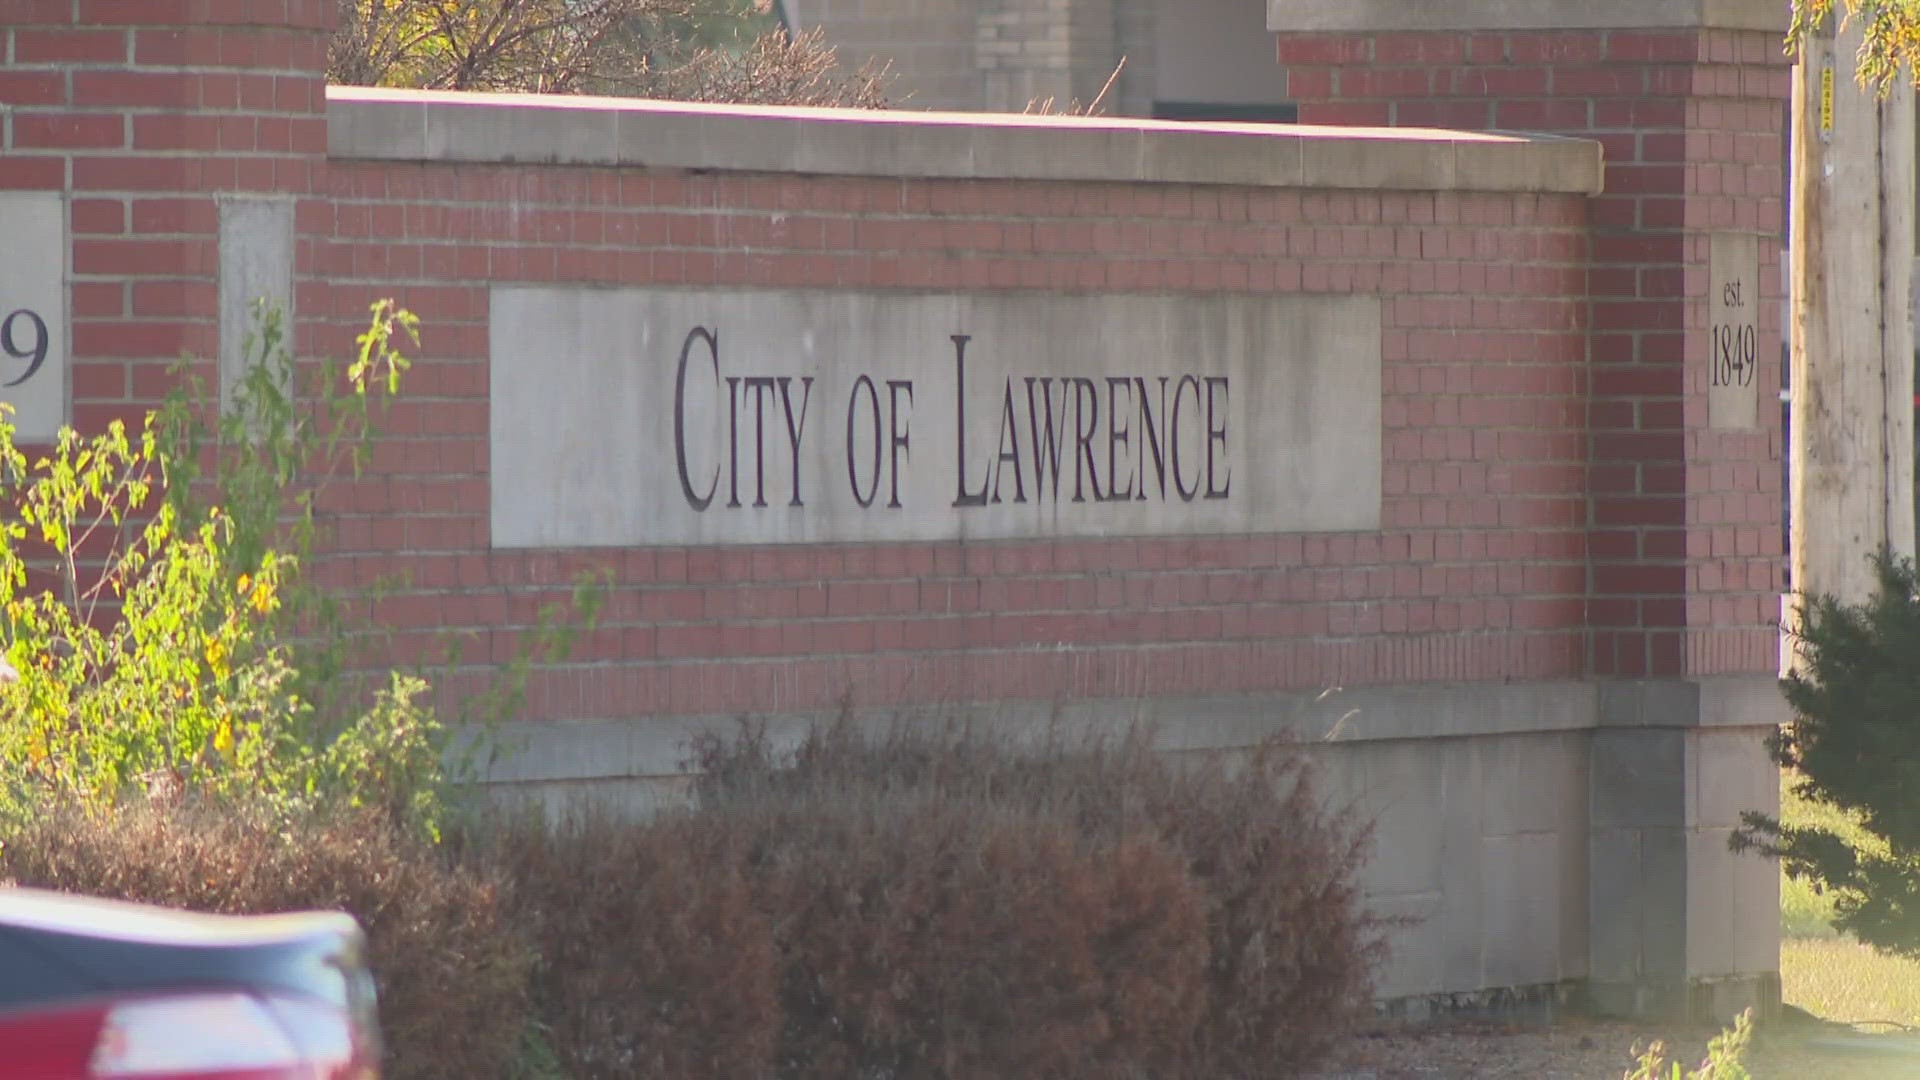 Our "Decision 2023 in Marion County" series takes you to Lawrence and the challenges facing the growing community.